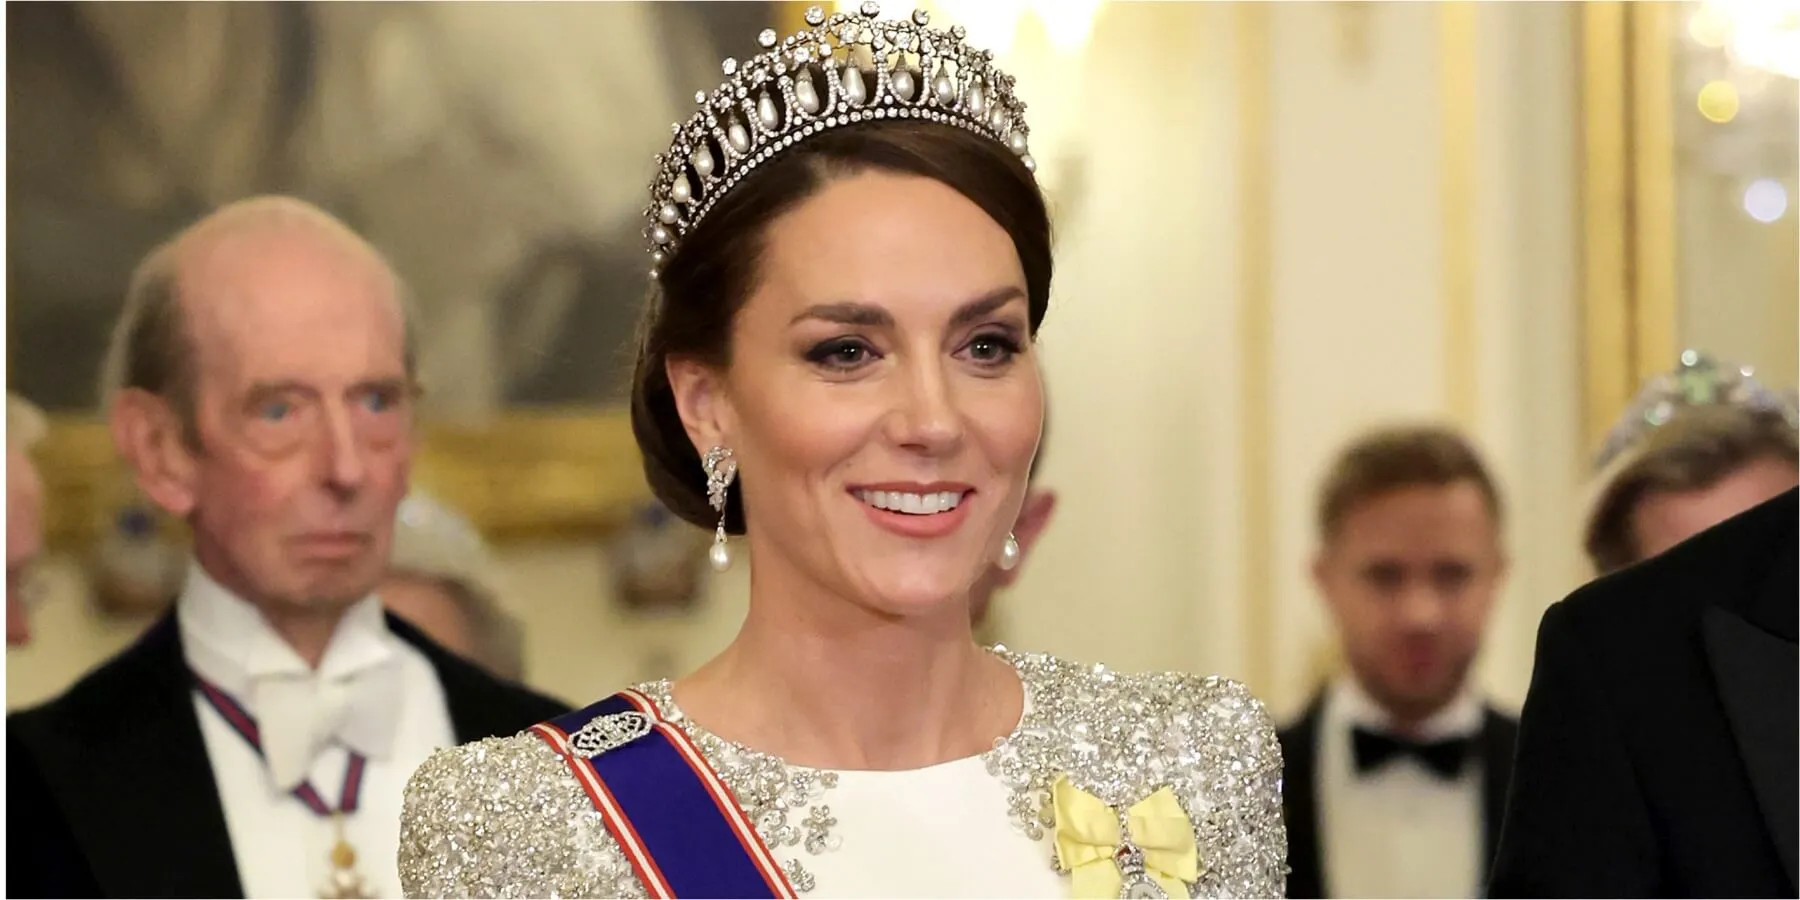 Kate Middleton during the State Banquet at Buckingham Palace on November 22, 2022 in London, England.